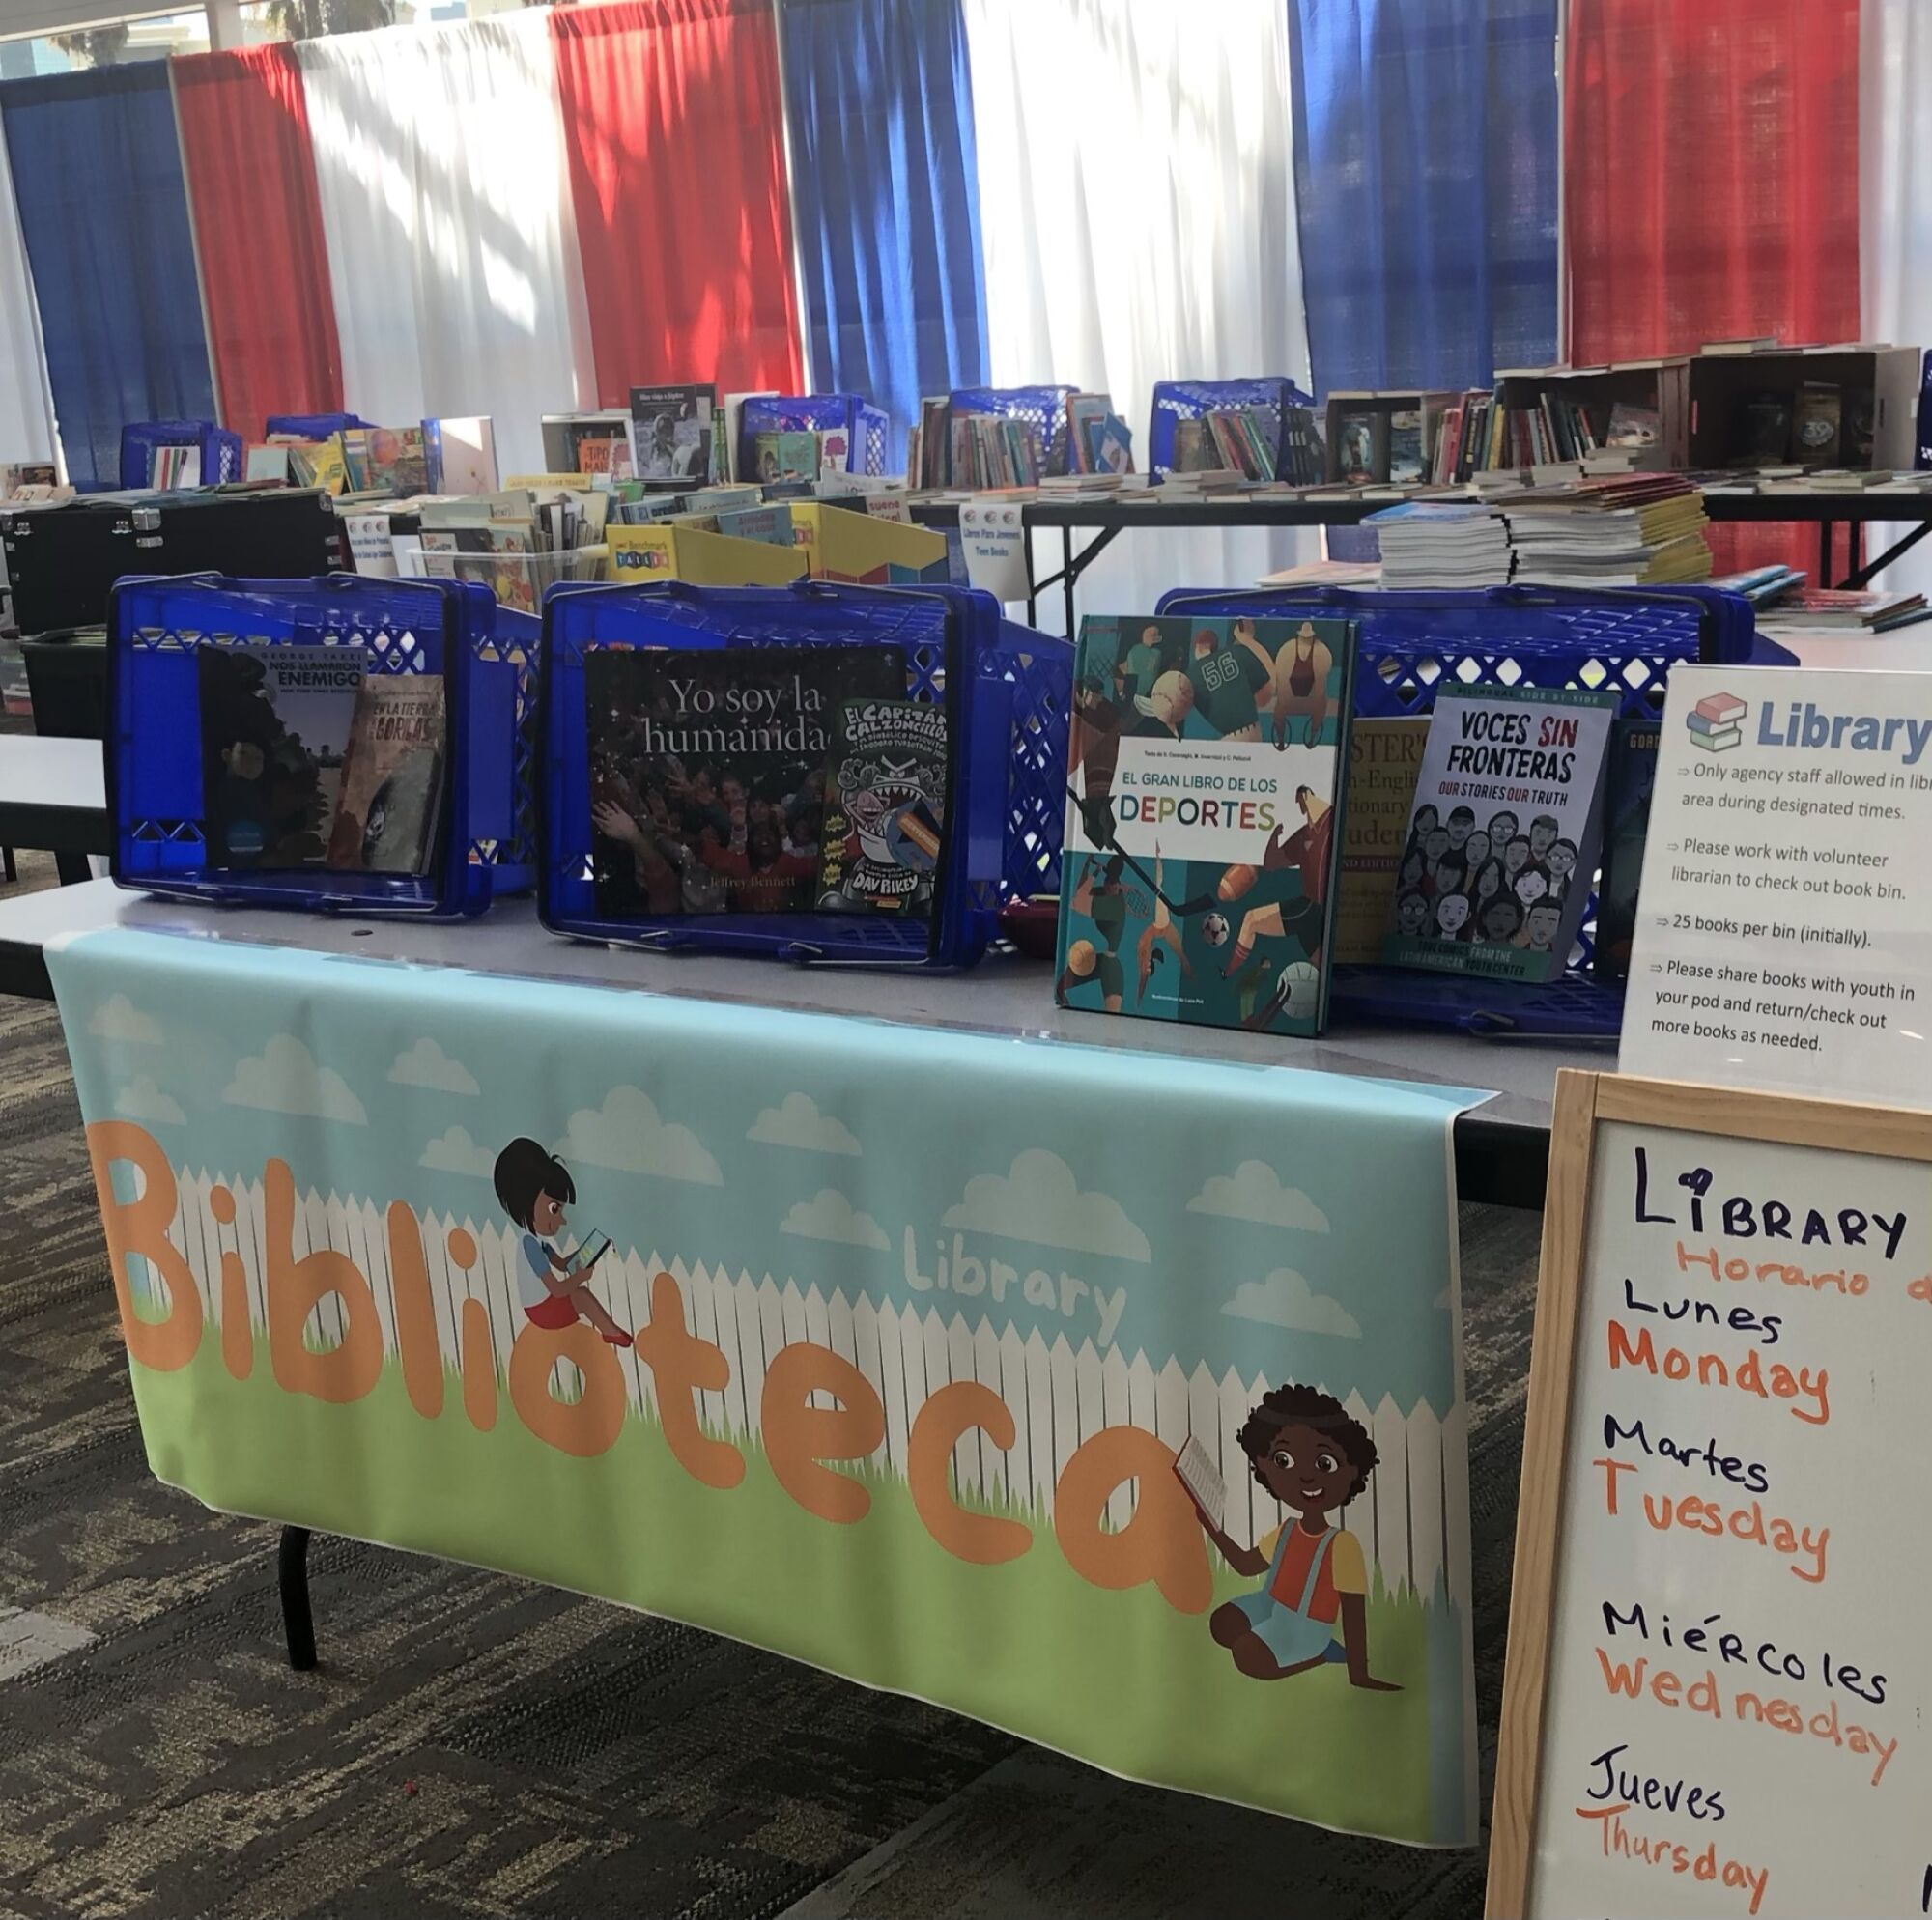 A table with crates of books and a sign that says "Biblioteca" or library